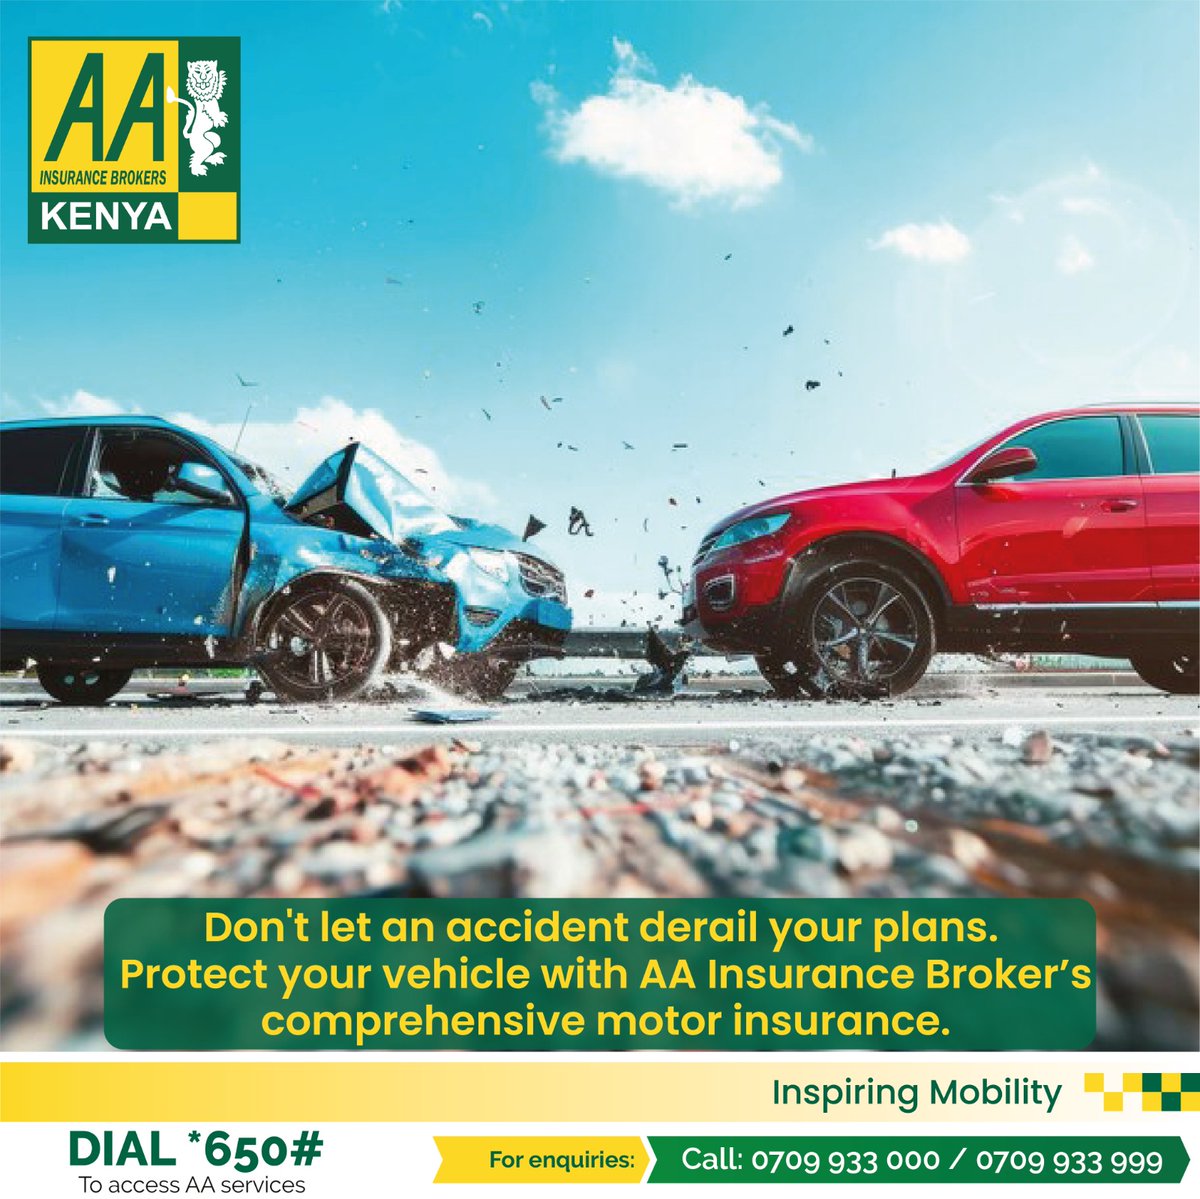 Protect your vehicle and your wallet with the right motor insurance plan. Request a free quote from AA Insurance Brokers, call us on 0720940636/0709933000
#AAIBCares #MotorInsurance